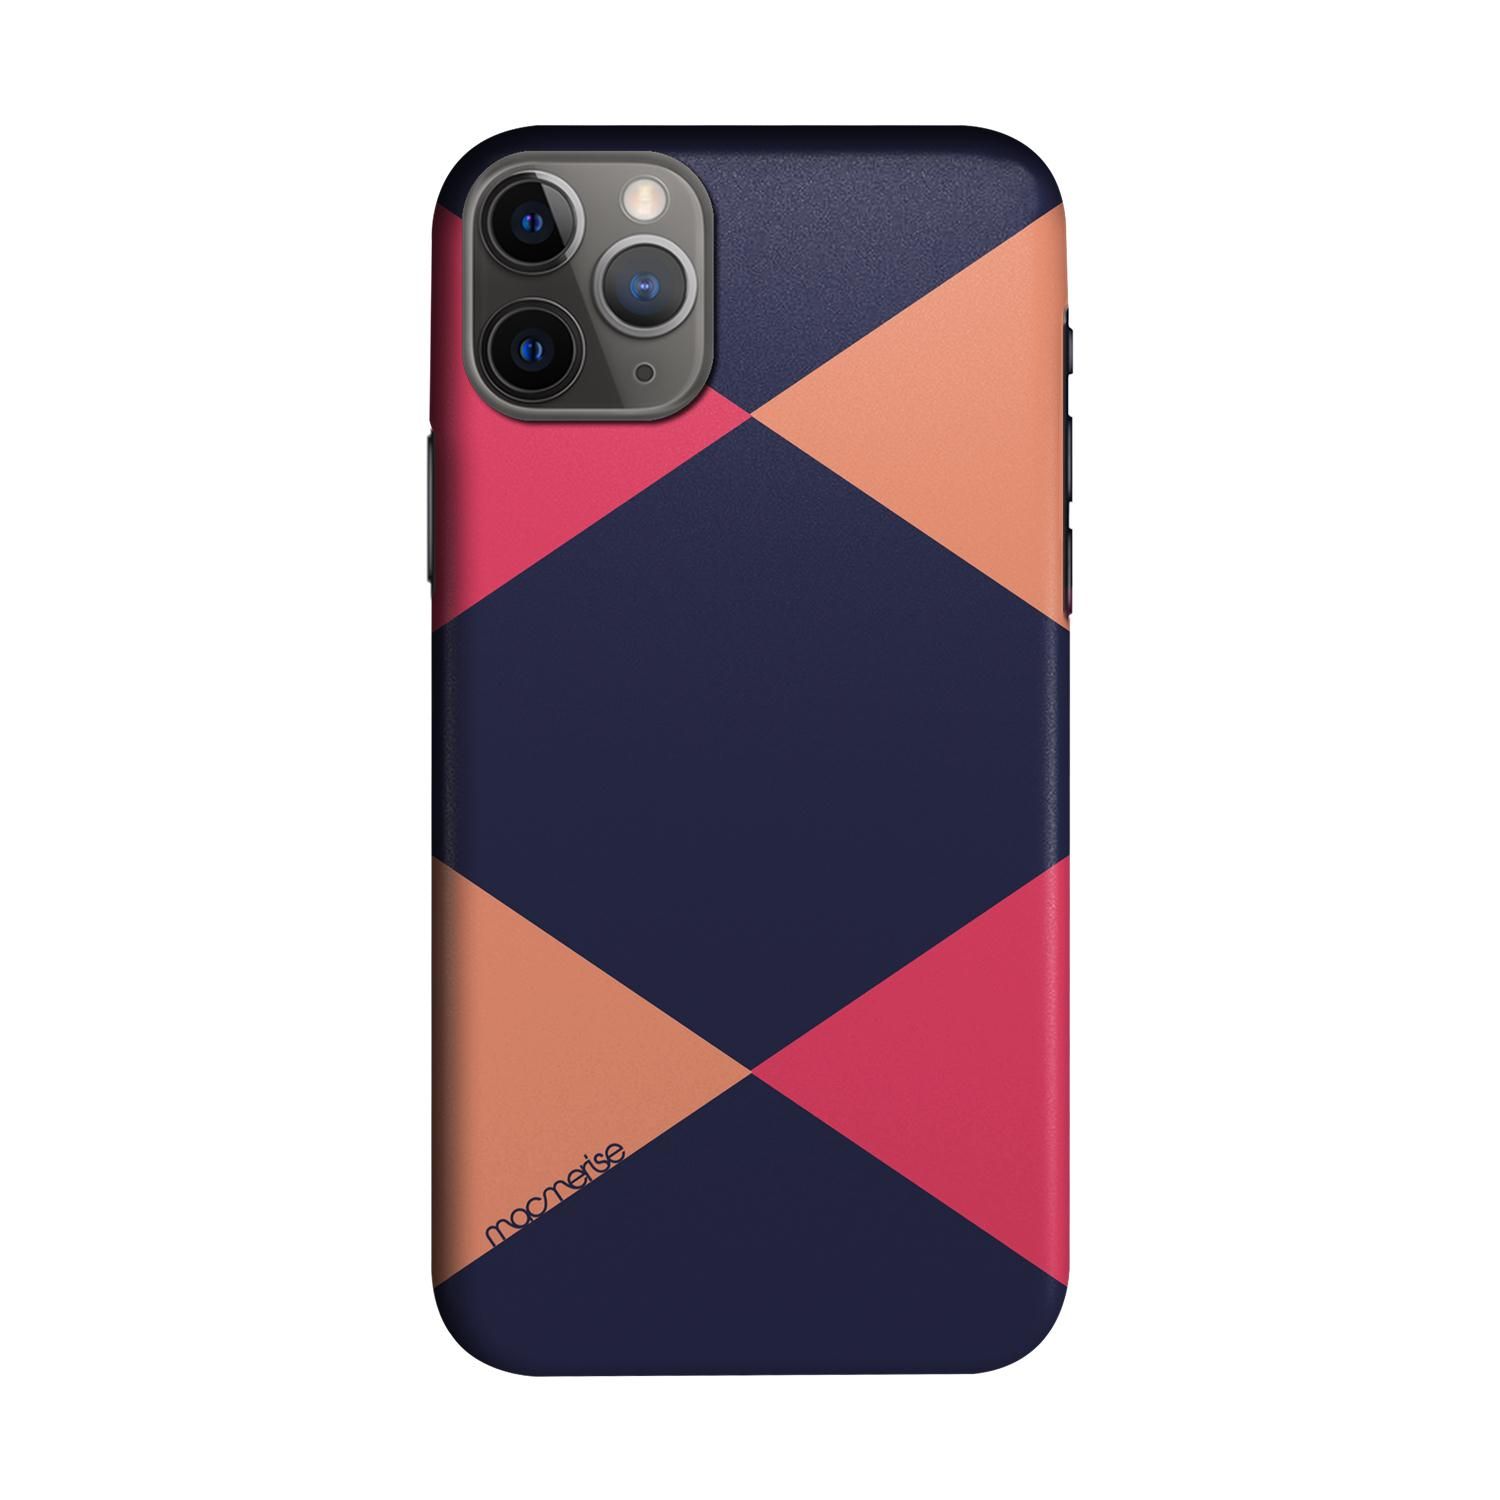 Buy Criss Cross Blupink - Sleek Phone Case for iPhone 11 Pro Max Online